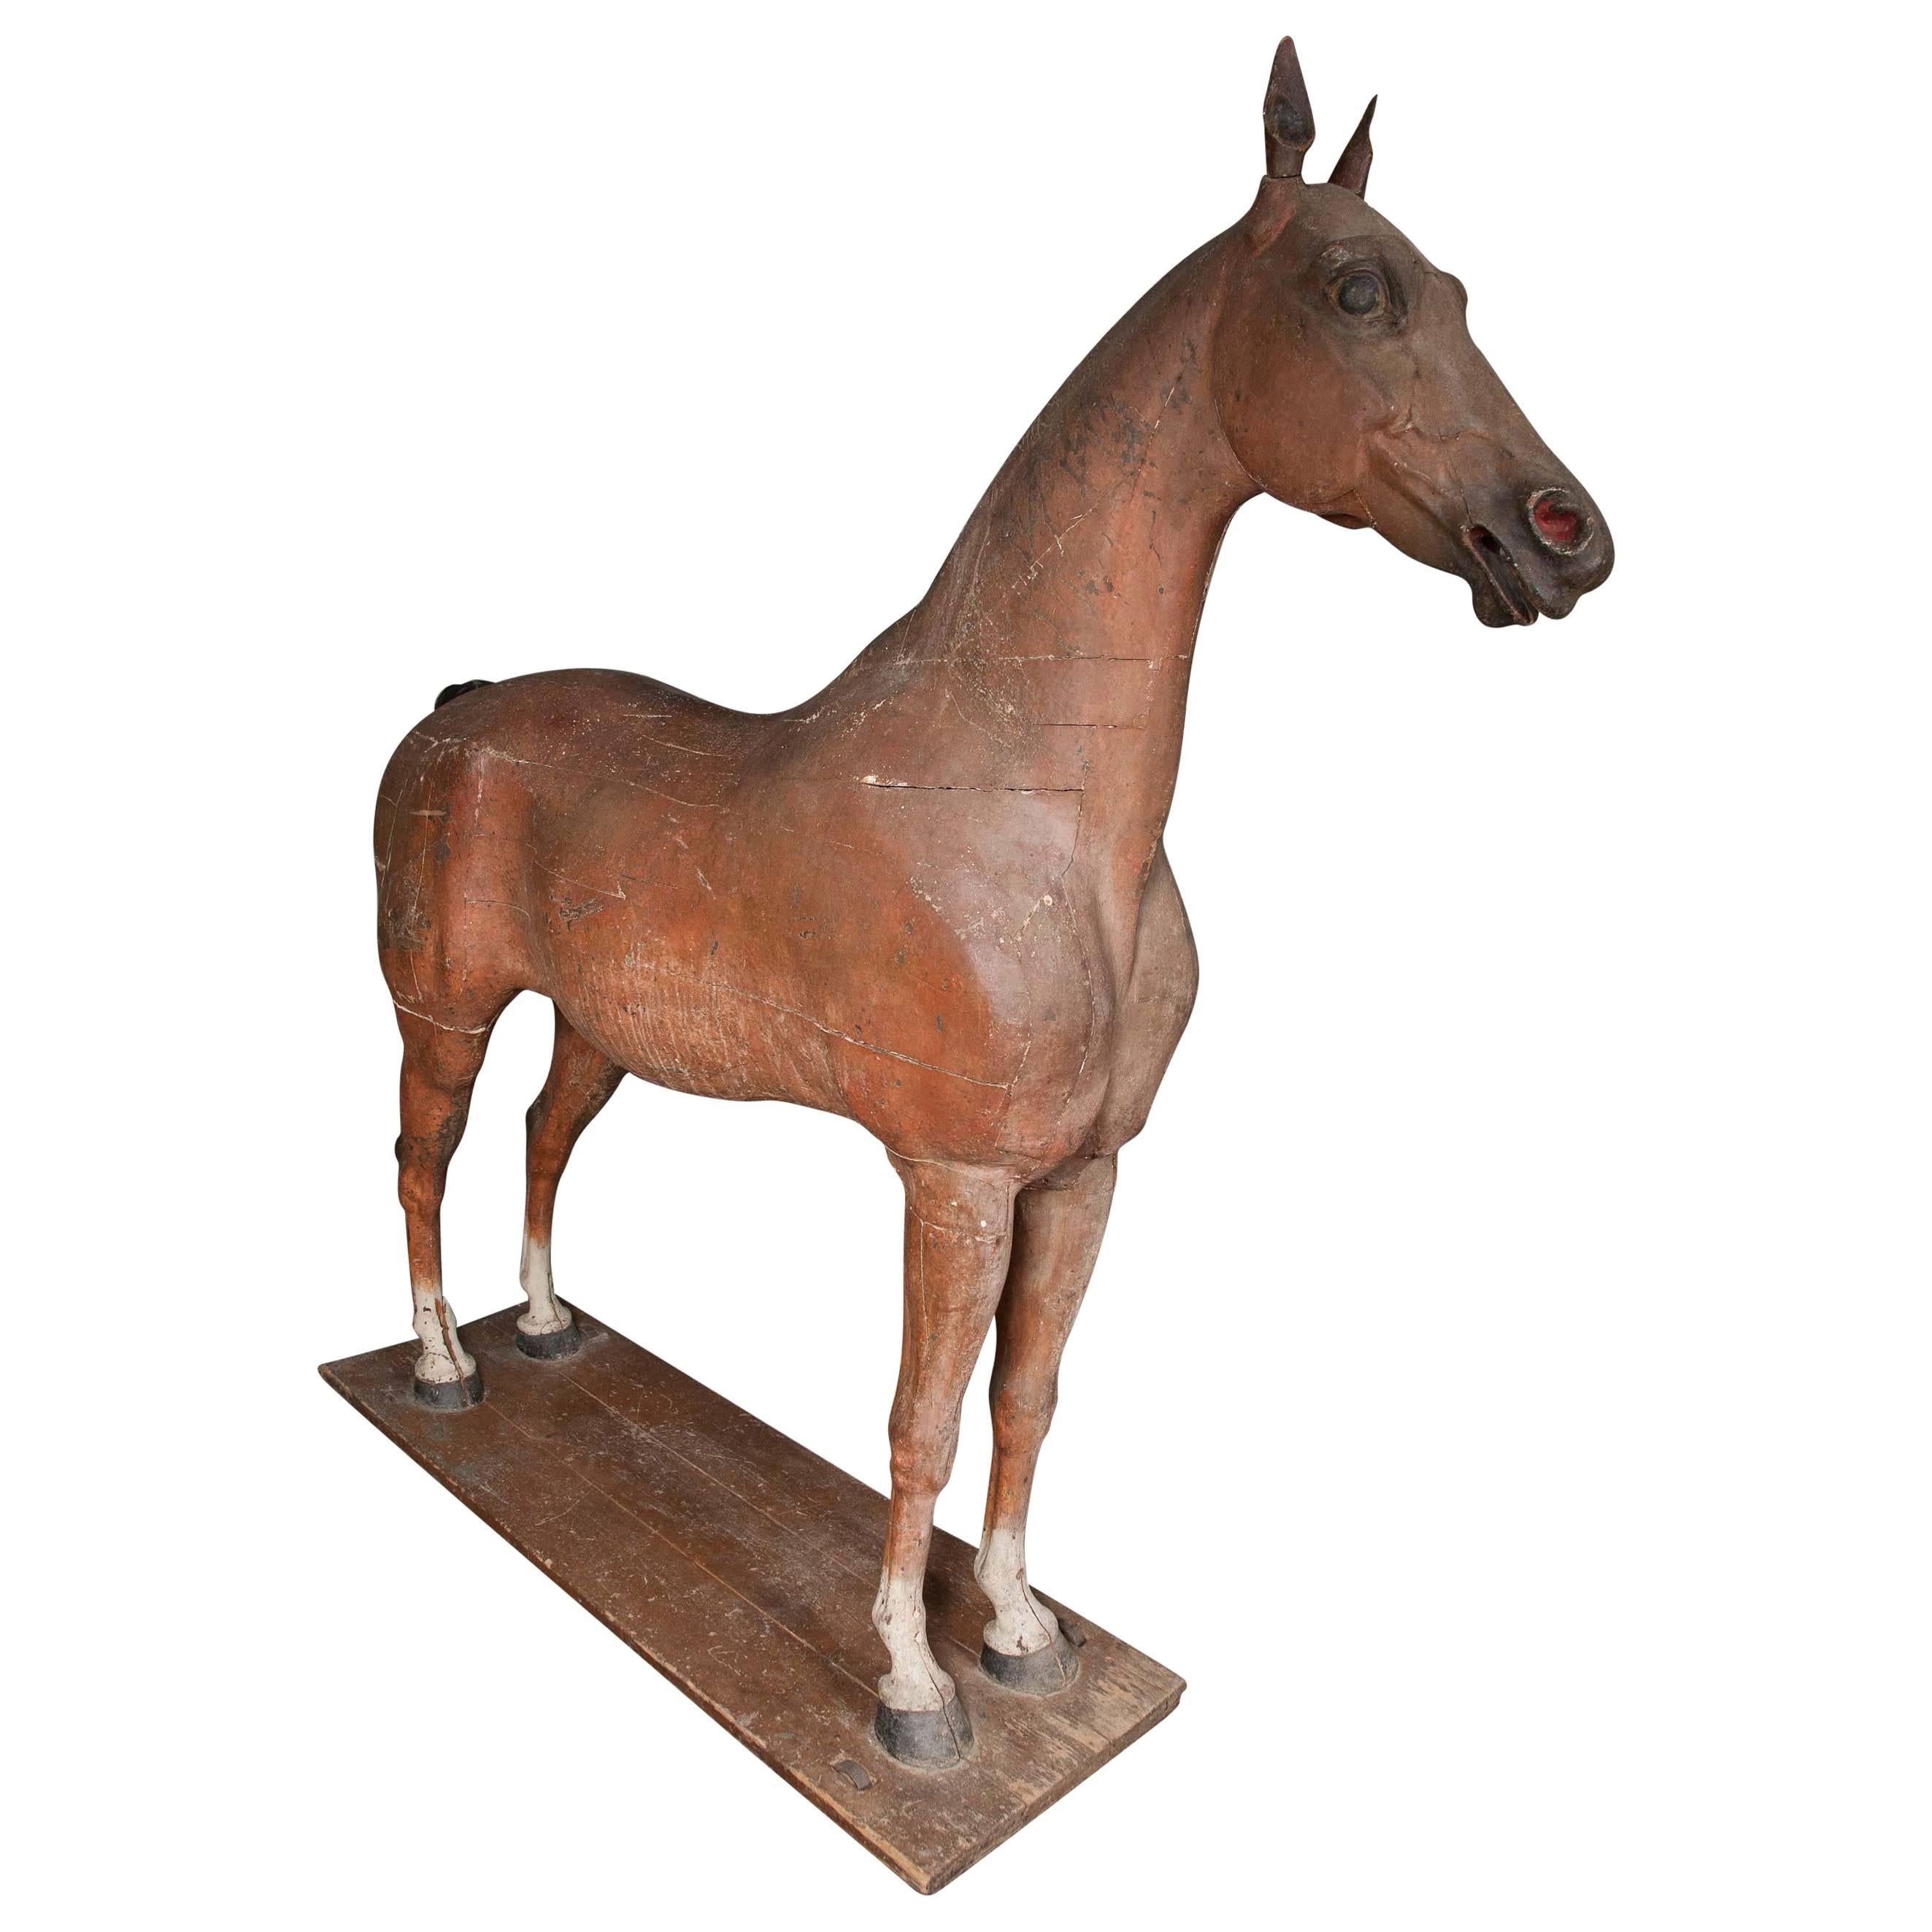 Late 18th-Early 19th Century, Full Size Wooden Sculpture of a Horse